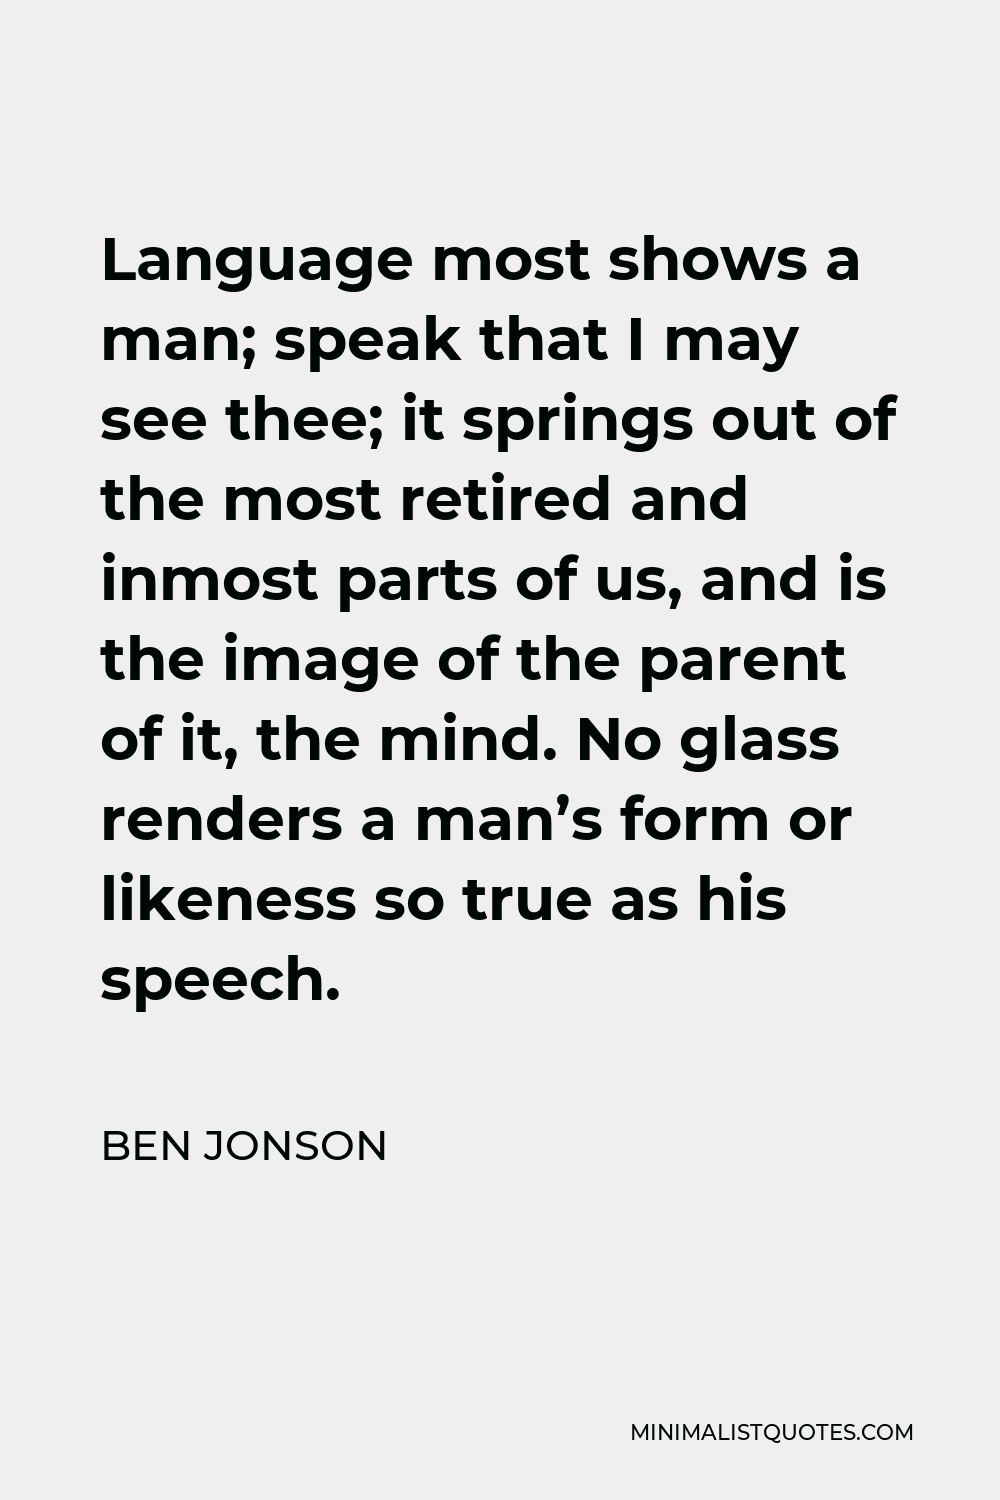 Ben Jonson Quote - Language most shows a man, speak that I may see thee.